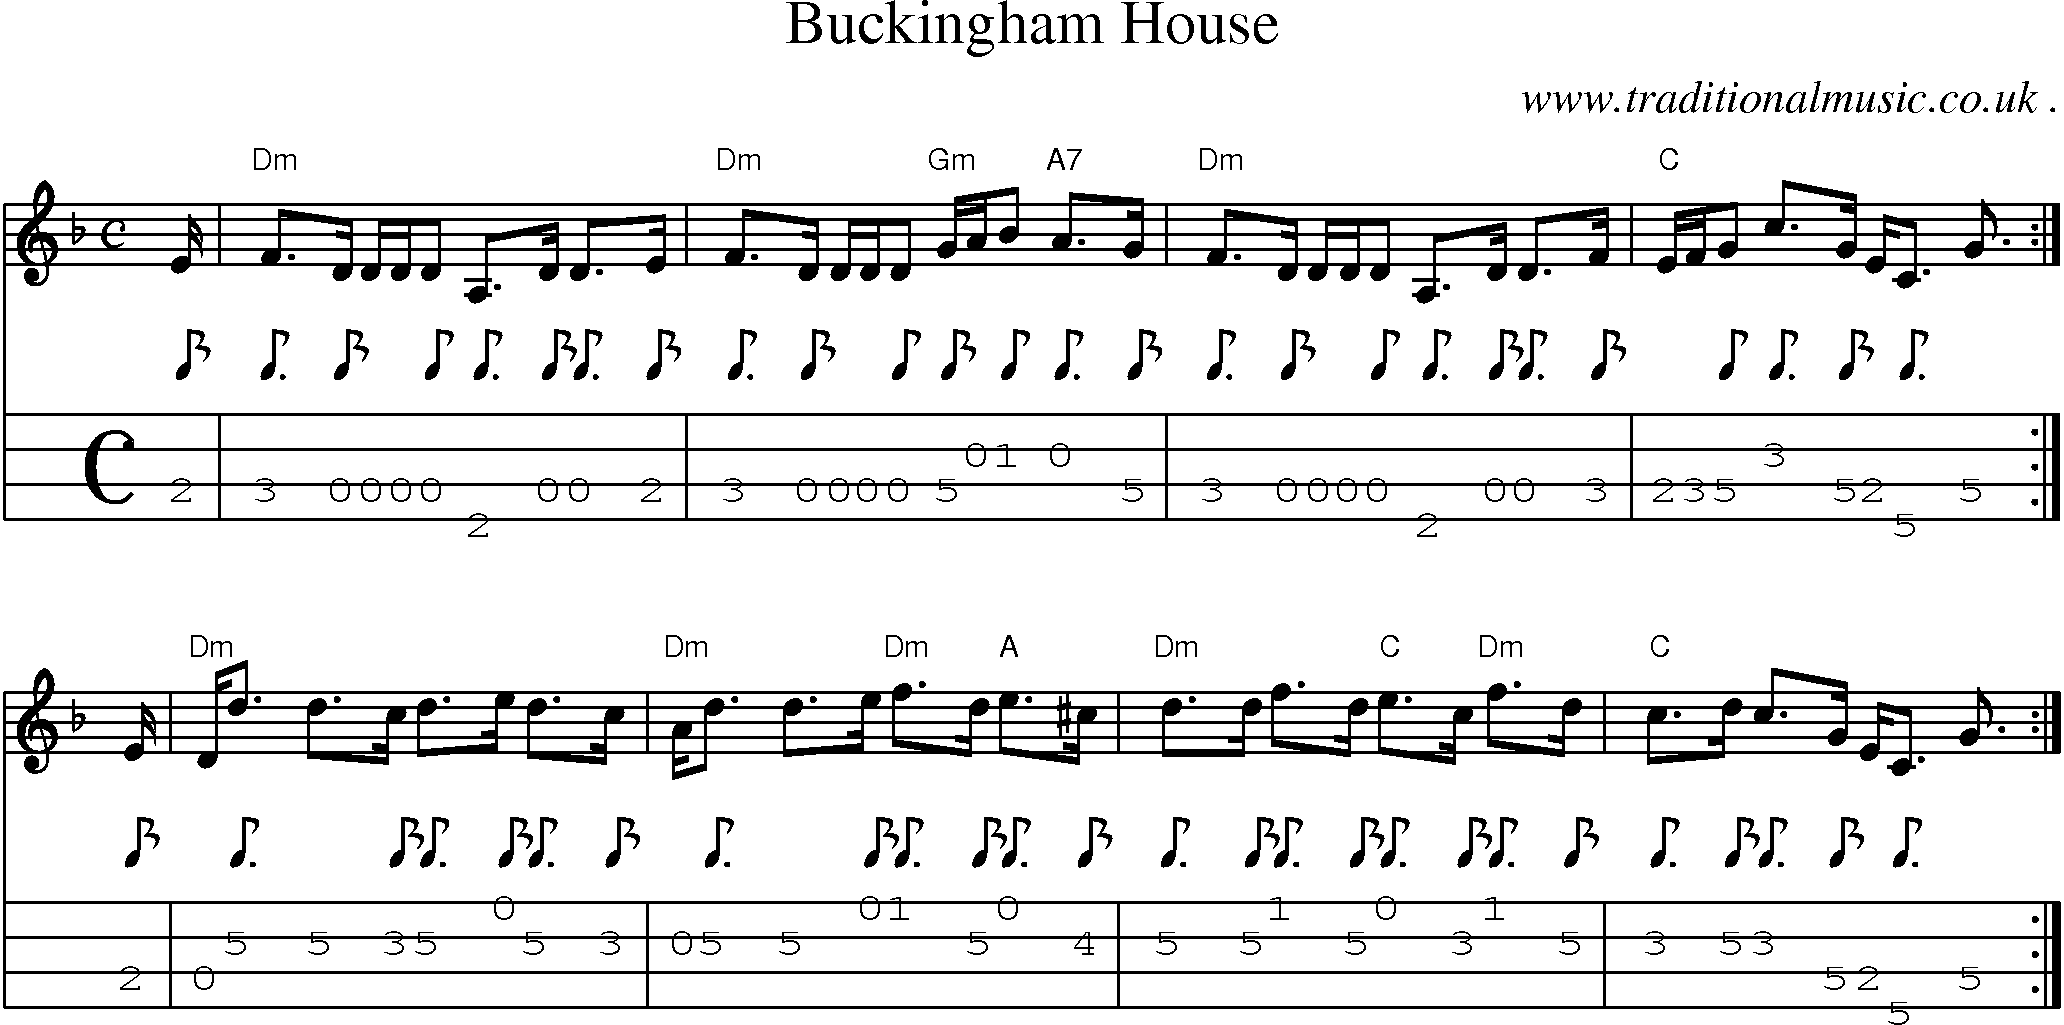 Sheet-music  score, Chords and Mandolin Tabs for Buckingham House